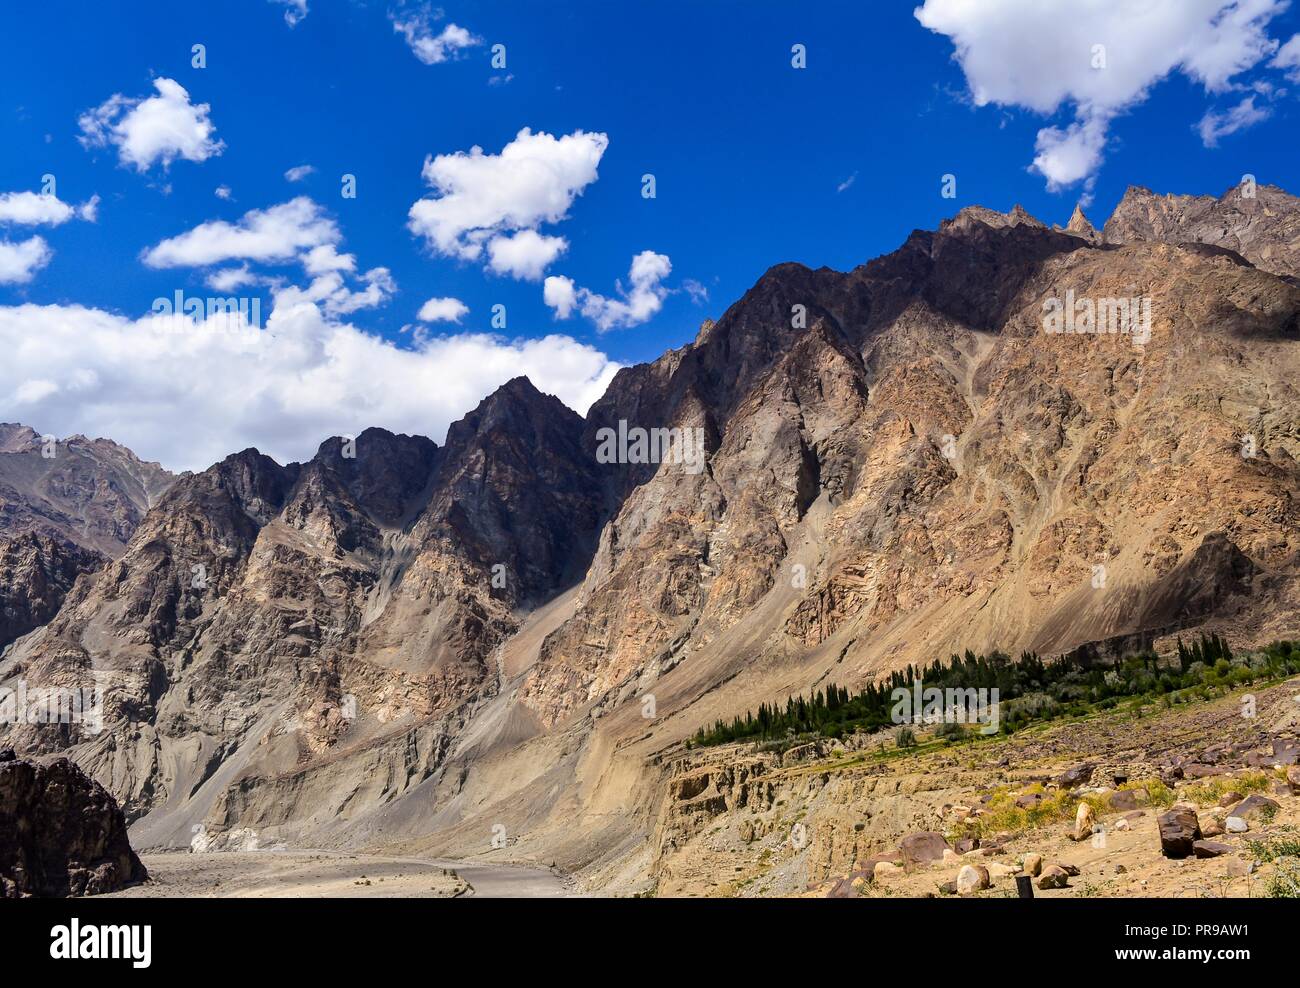 Image of Thang village from the last army post on the Indian side. Thang is a part of Turtuk village, which was under Pakistan's control until 1971. Stock Photo